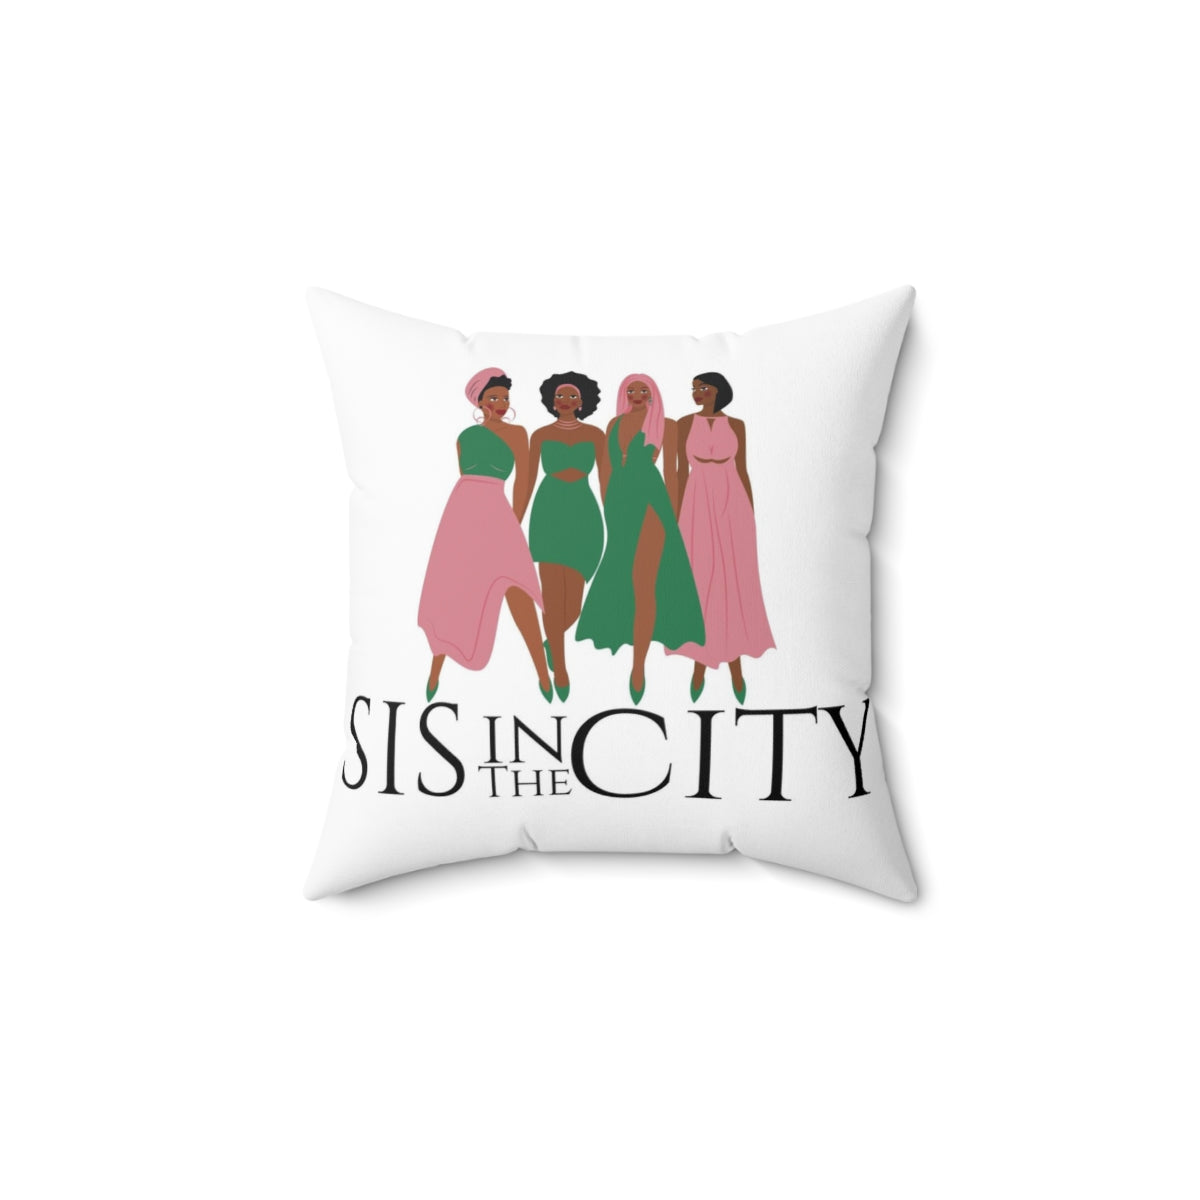 "Sis In The City" AKA Faux Suede Square Pillow